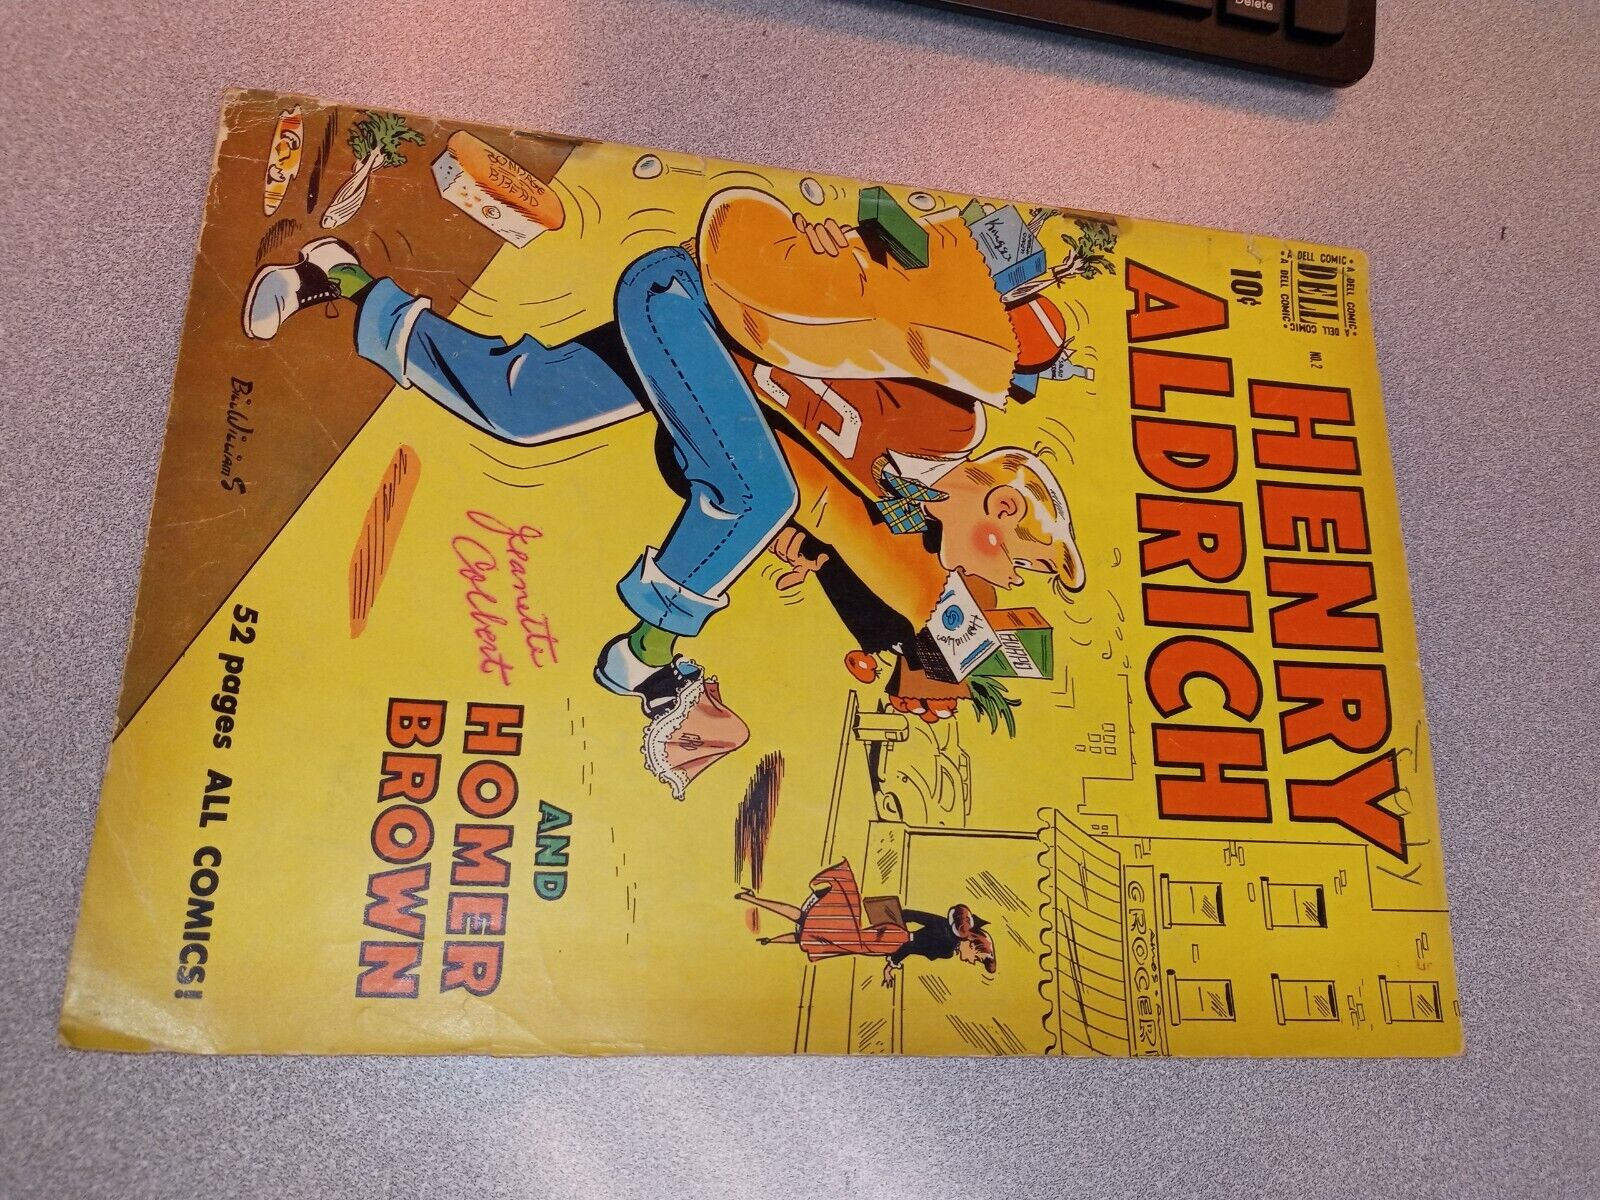 HENRY ALDRICH AND HOMER BROWN COMIC #2 1952 TEEN HUMOR DELL COMICS GOLDEN AGE